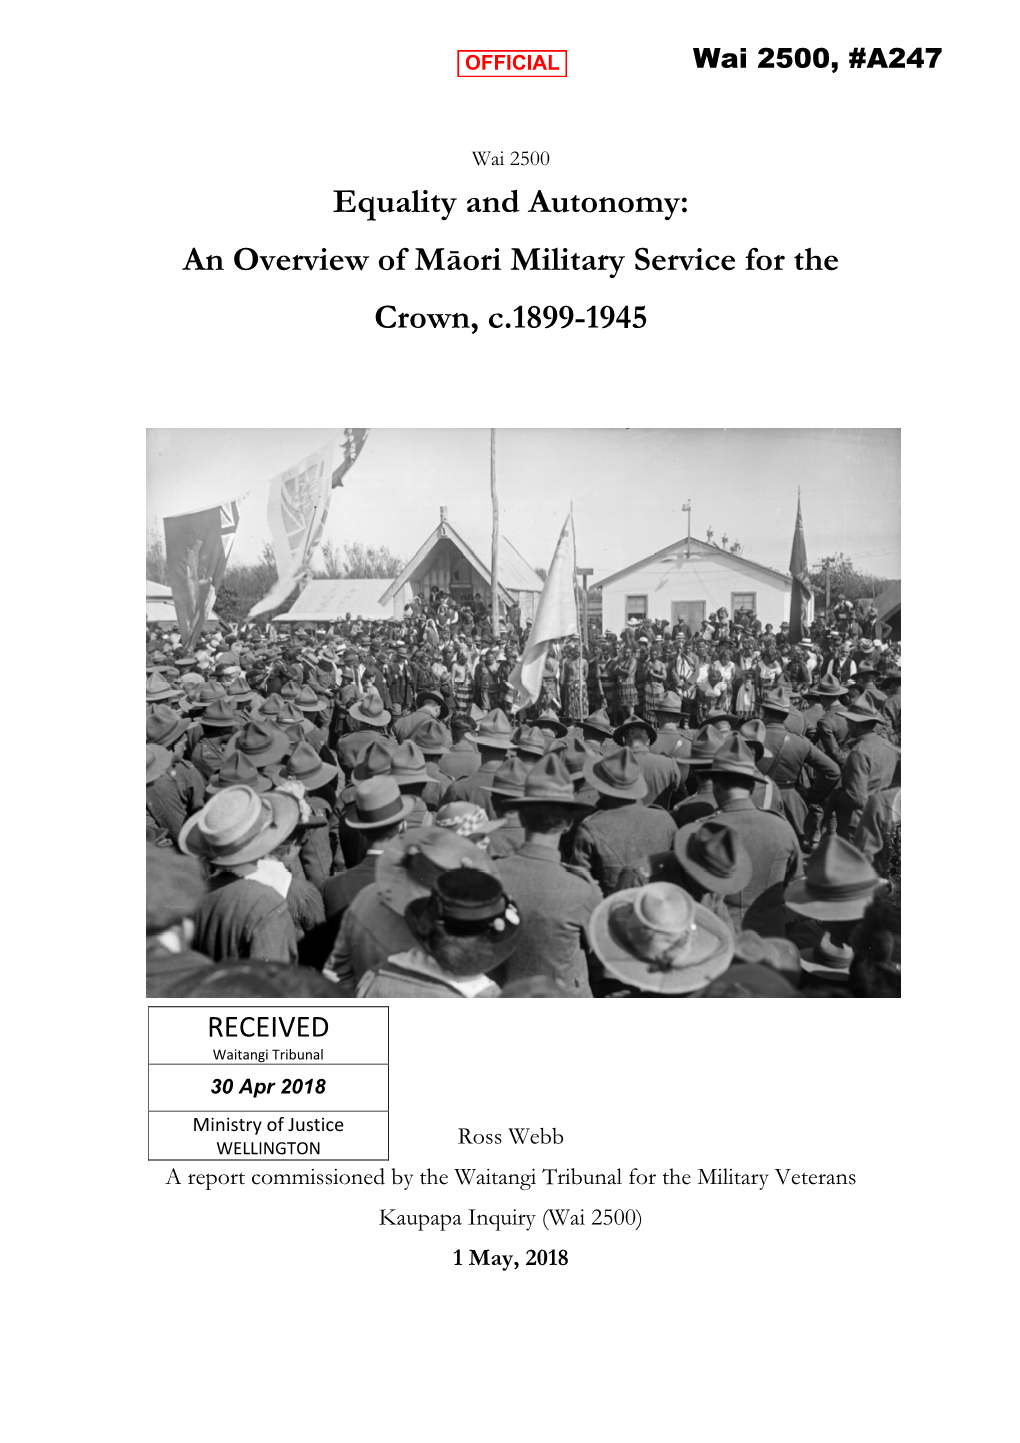 Equality and Autonomy: an Overview of Māori Military Service for the Crown, C.1899-1945